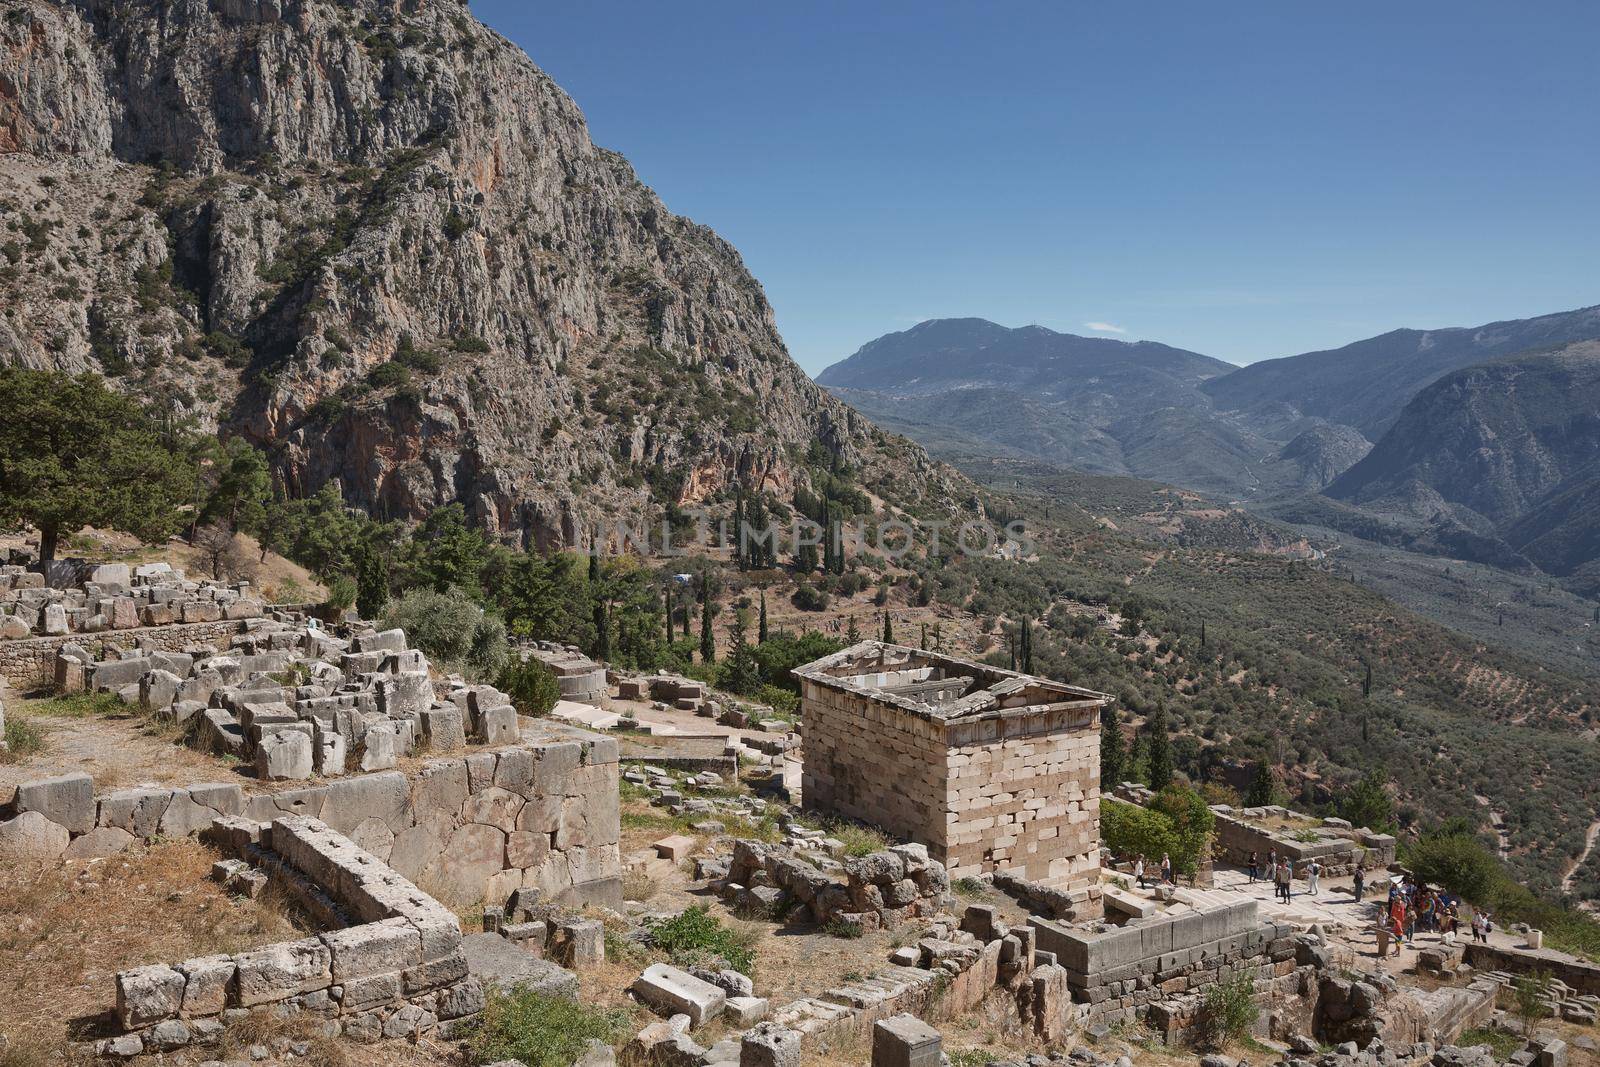 Ruins of Delphi is ancient sanctuary that grew rich as seat of oracle that was consulted on important decisions throughout ancient classical world. UNESCO World heritage.